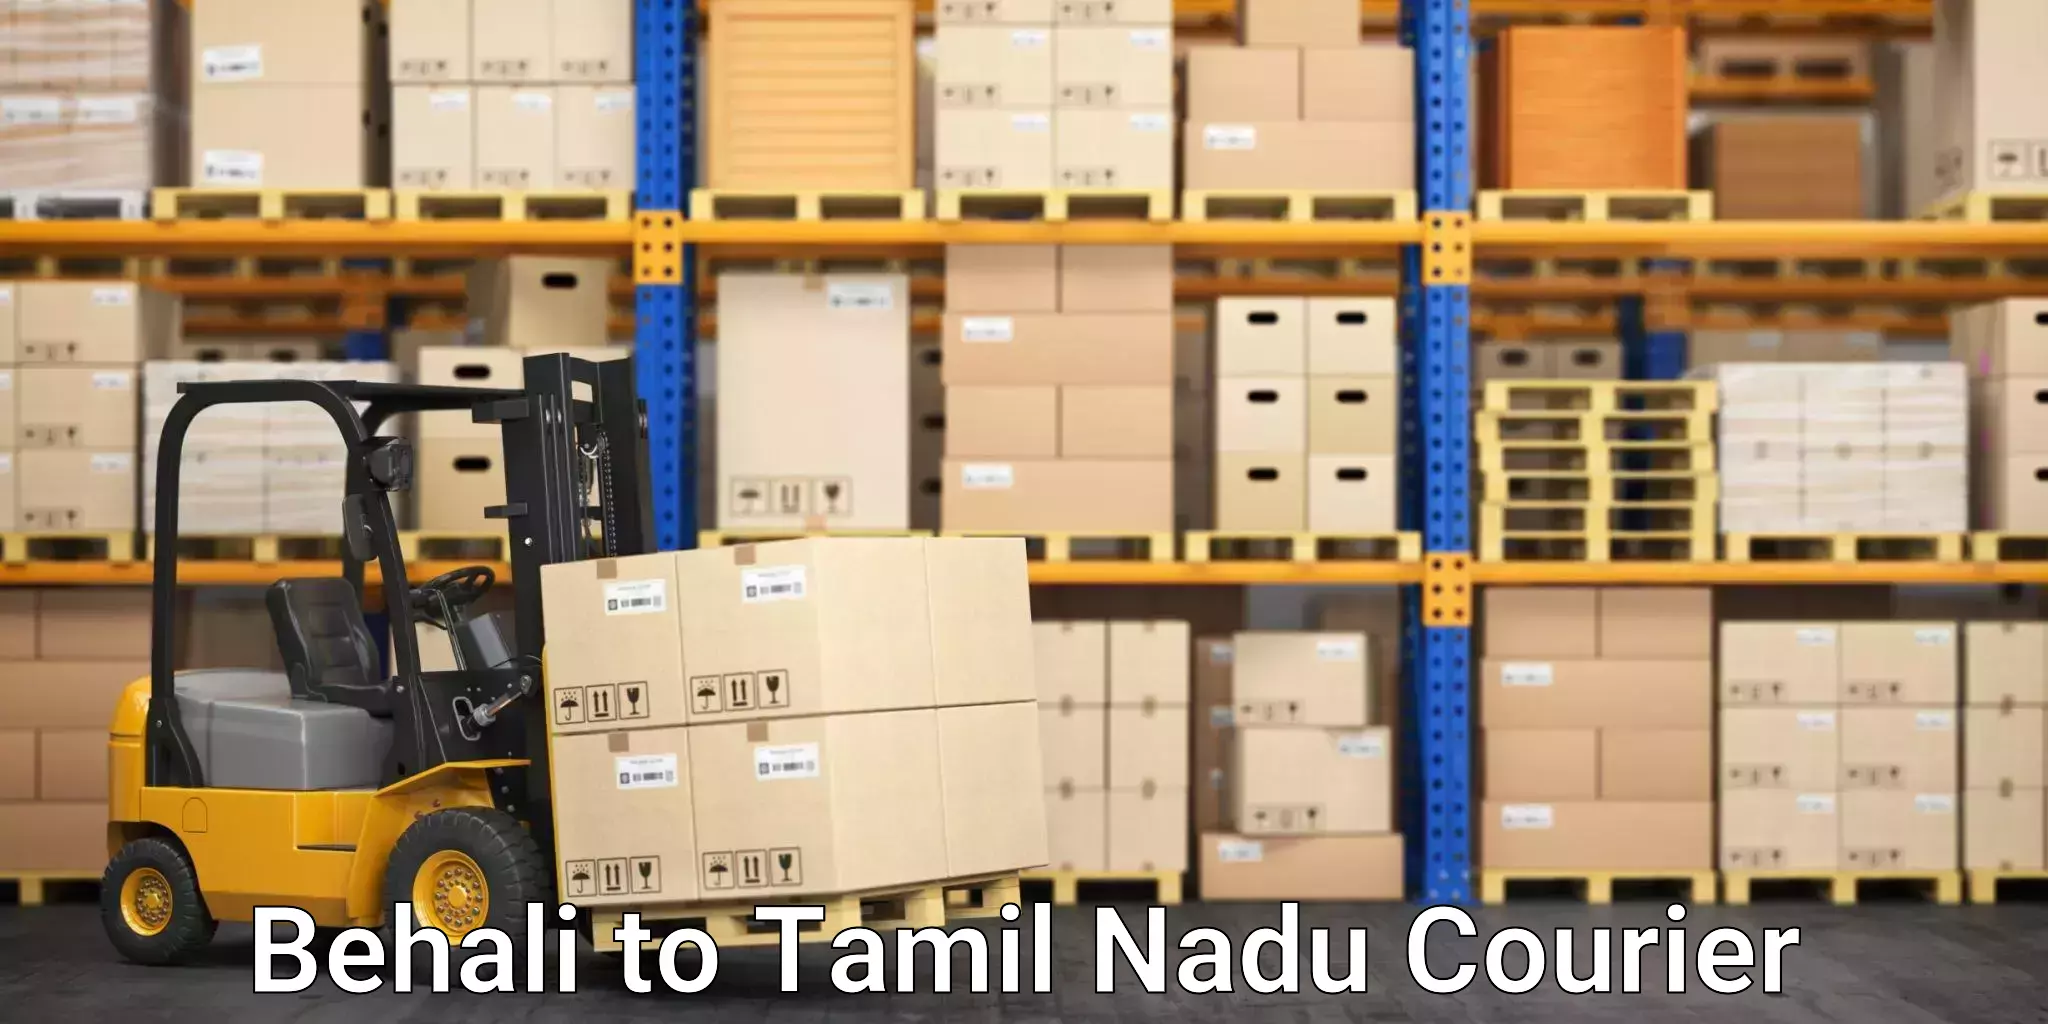 Parcel delivery automation Behali to Palani